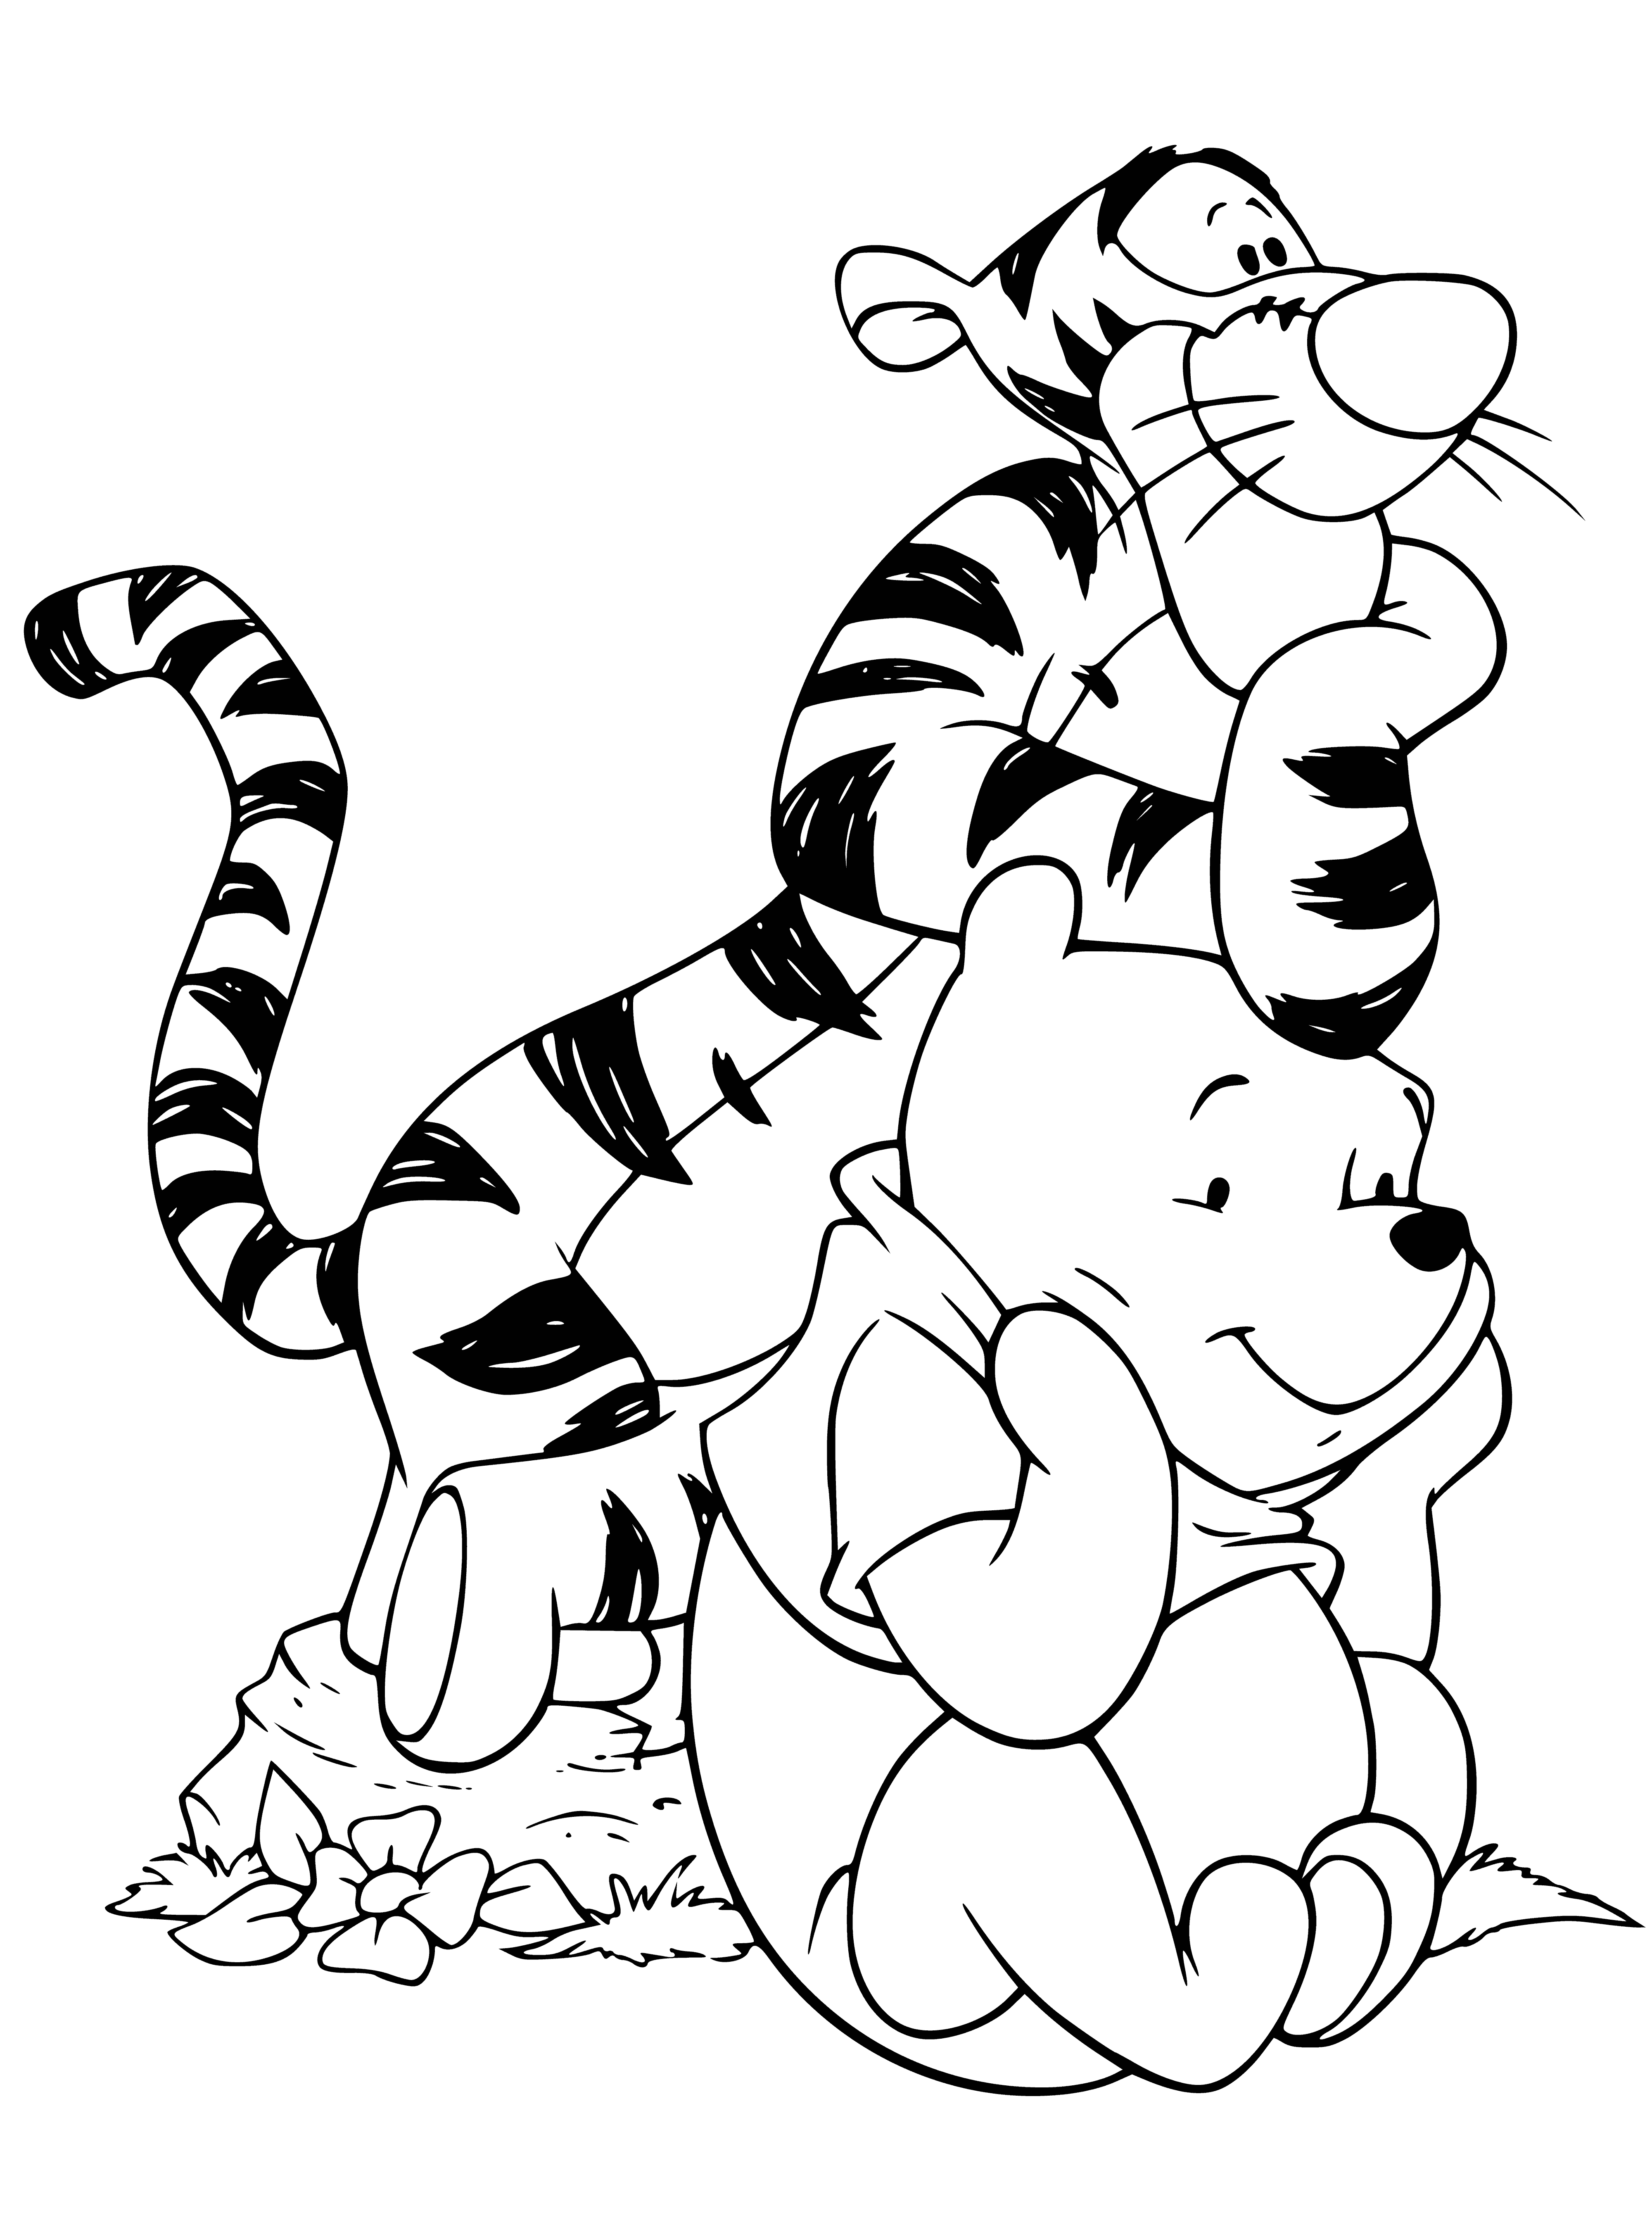 coloring page: Tigger happily bounces & Winnie looks contentedly from under a tree, enjoying each other's company. #WinnieThePooh